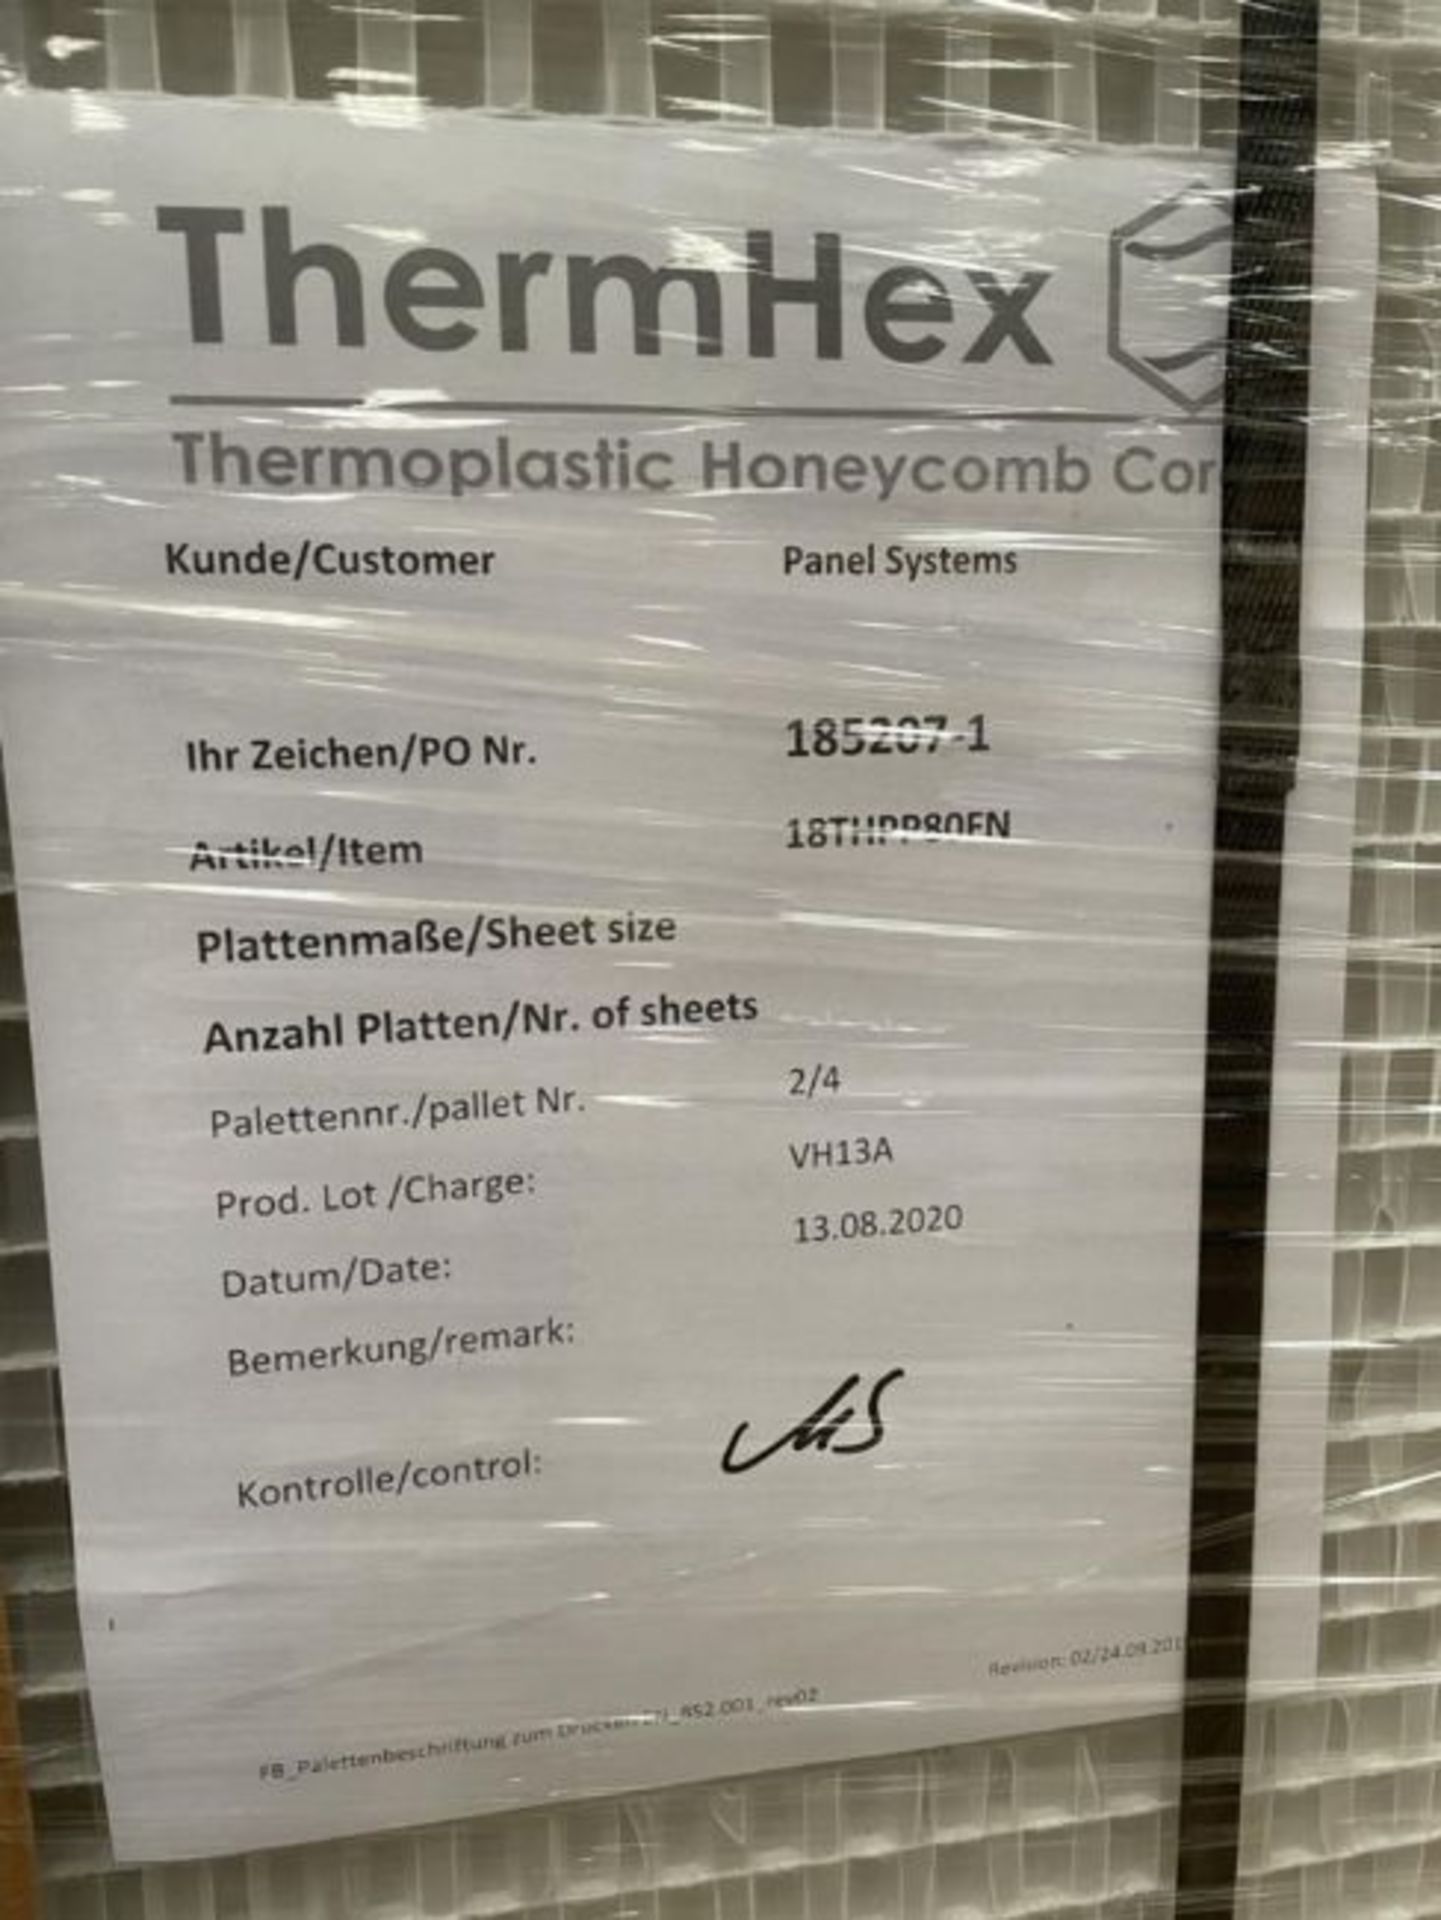 12 x ThermHex Thermoplastic Honeycomb Core Panels - Size 693 x 1210 x 20mm - New Stock - Lightweight - Image 9 of 10